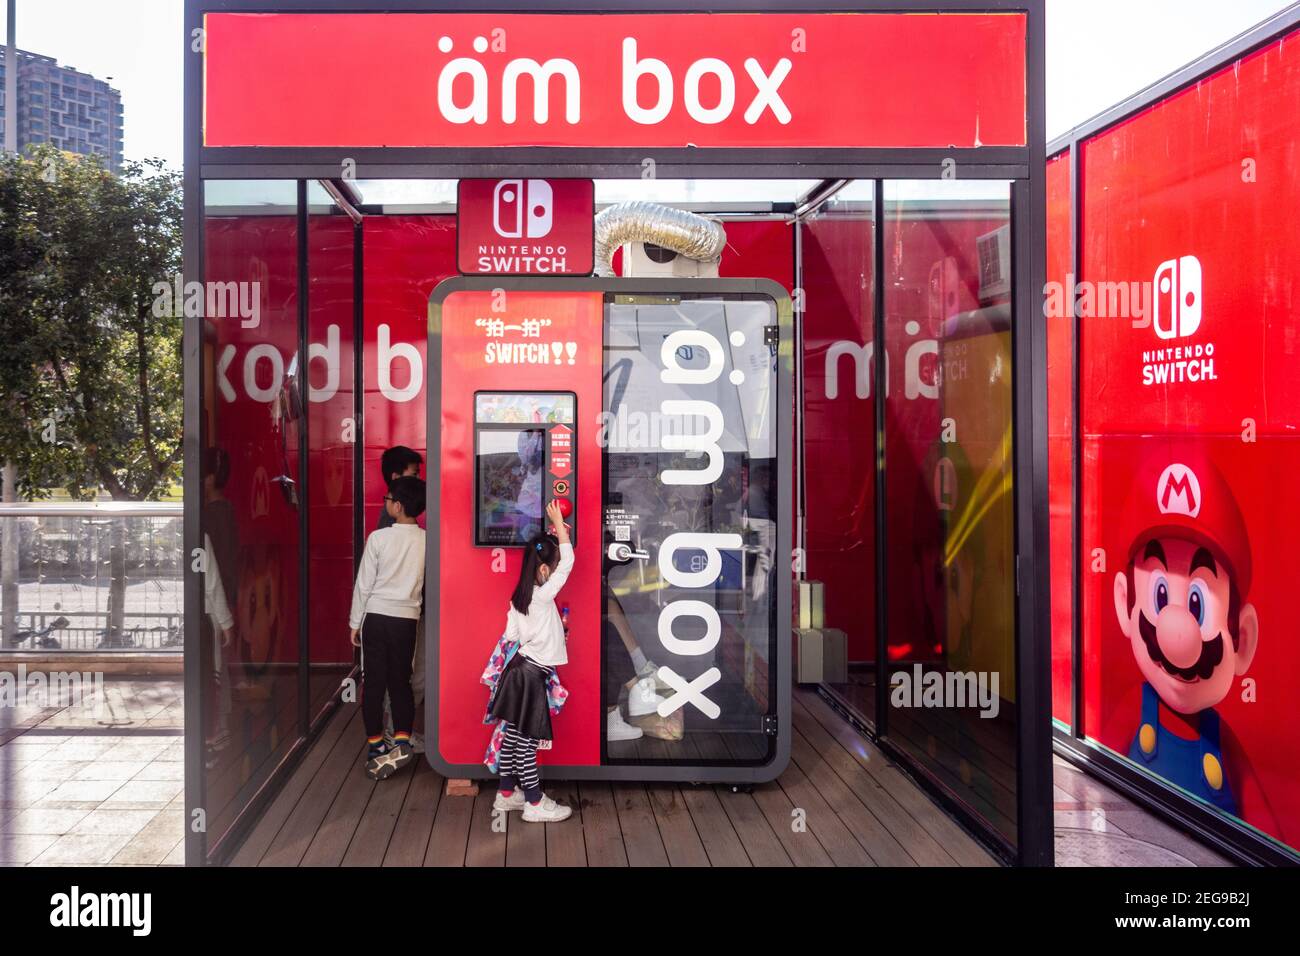 Nintendo game booths with people in Shenzhen China Stock Photo